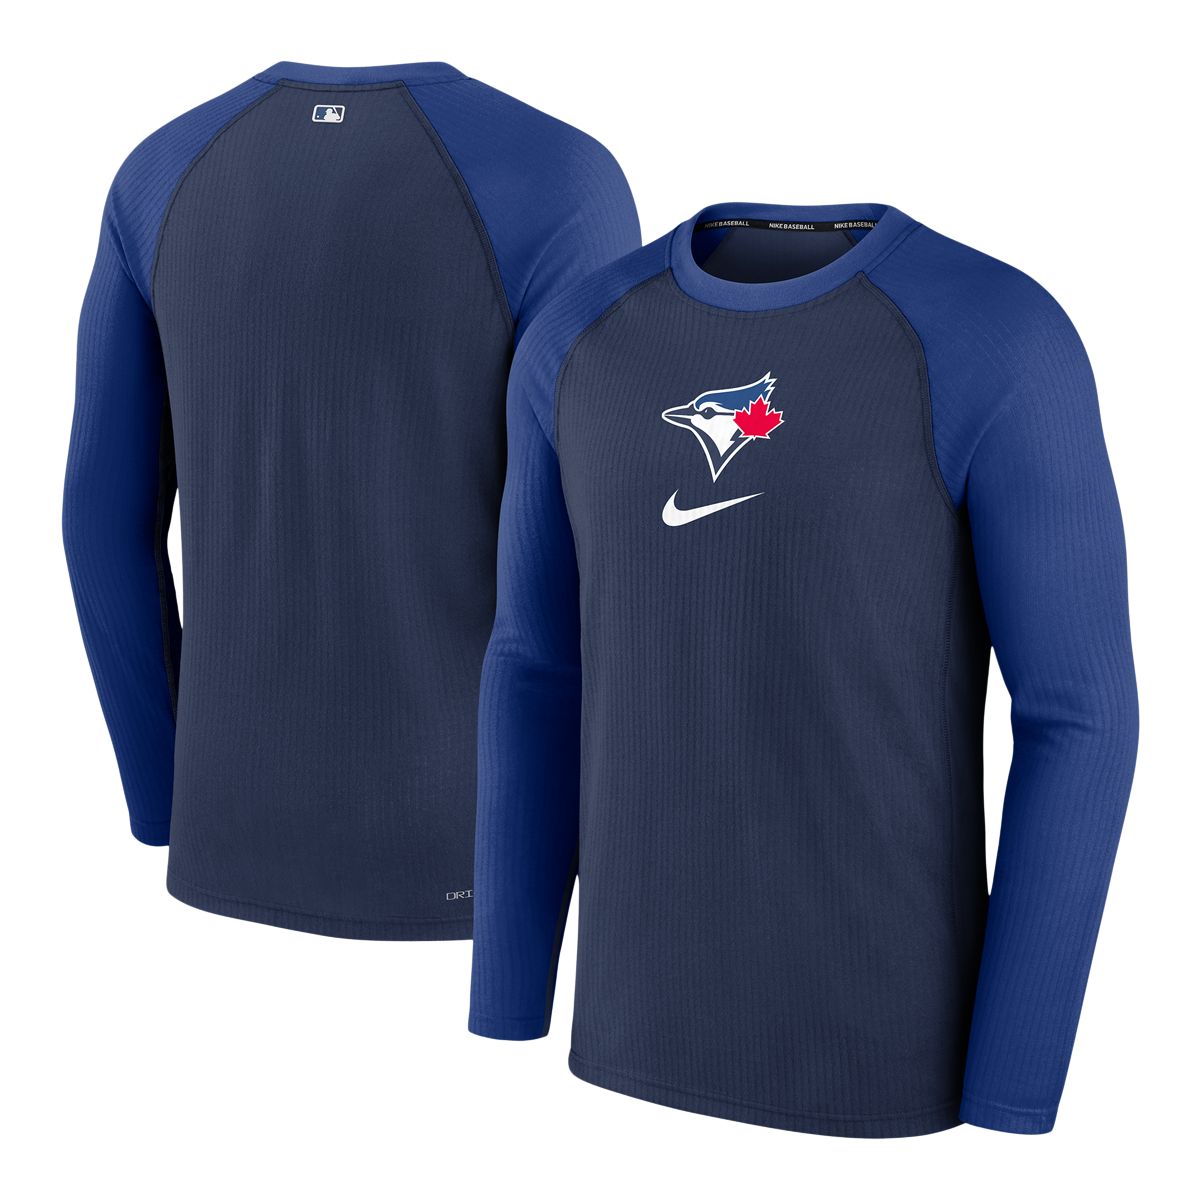 OUTERSTUFF Youth Toronto Blue Jays Legend Team Issue Long Sleeve Shirt